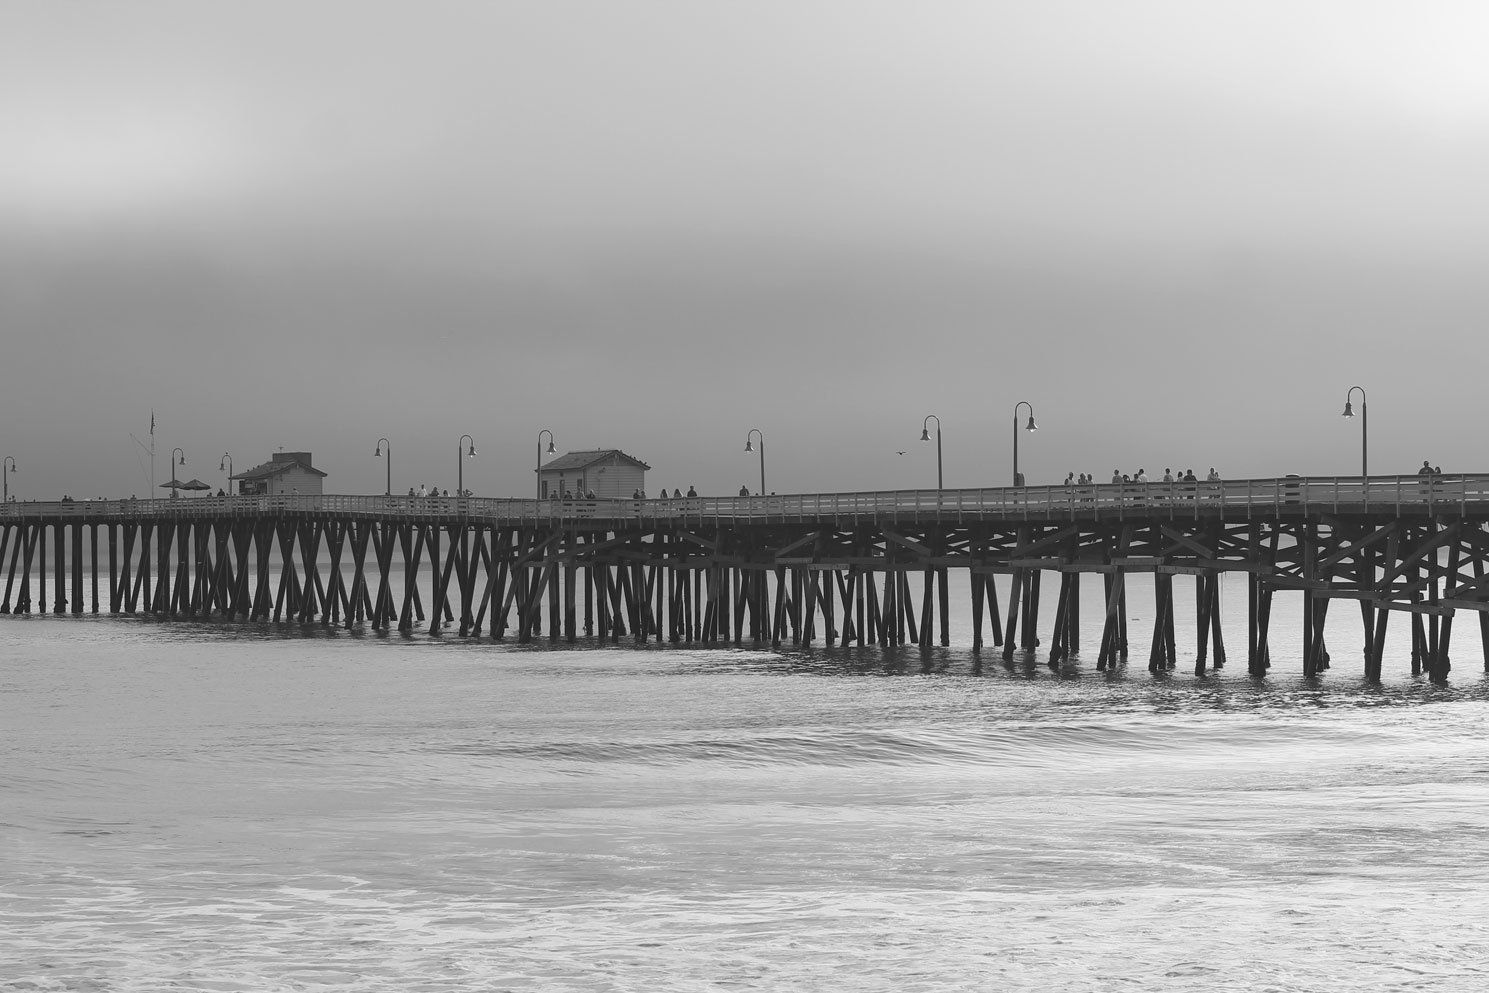 black and white image of a beach pier